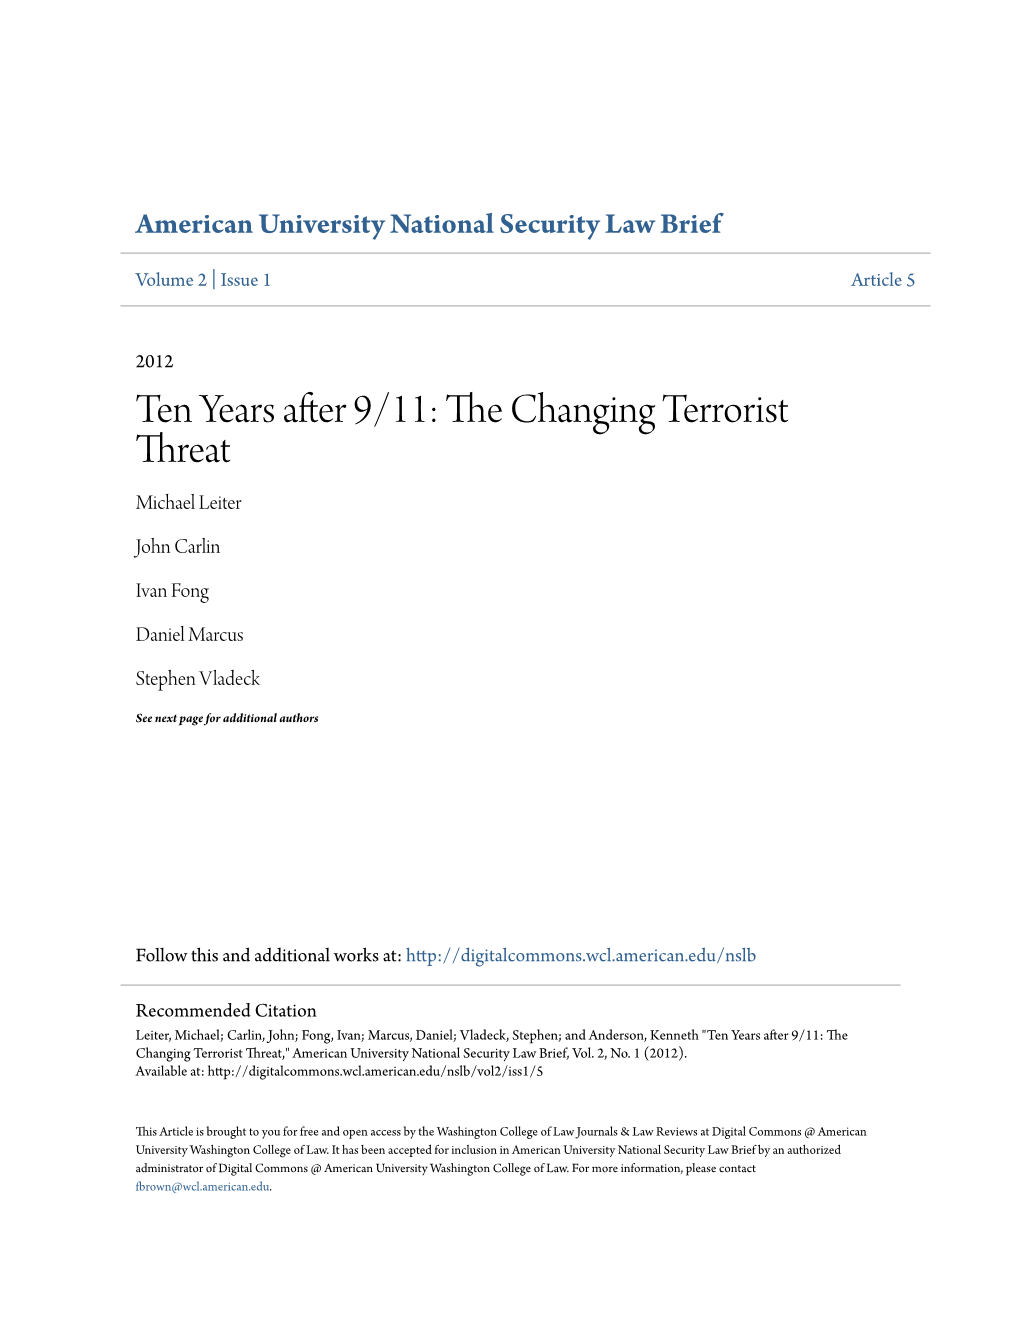 Ten Years After 9/11: the Changing Terrorist Threat," American University National Security Law Brief, Vol